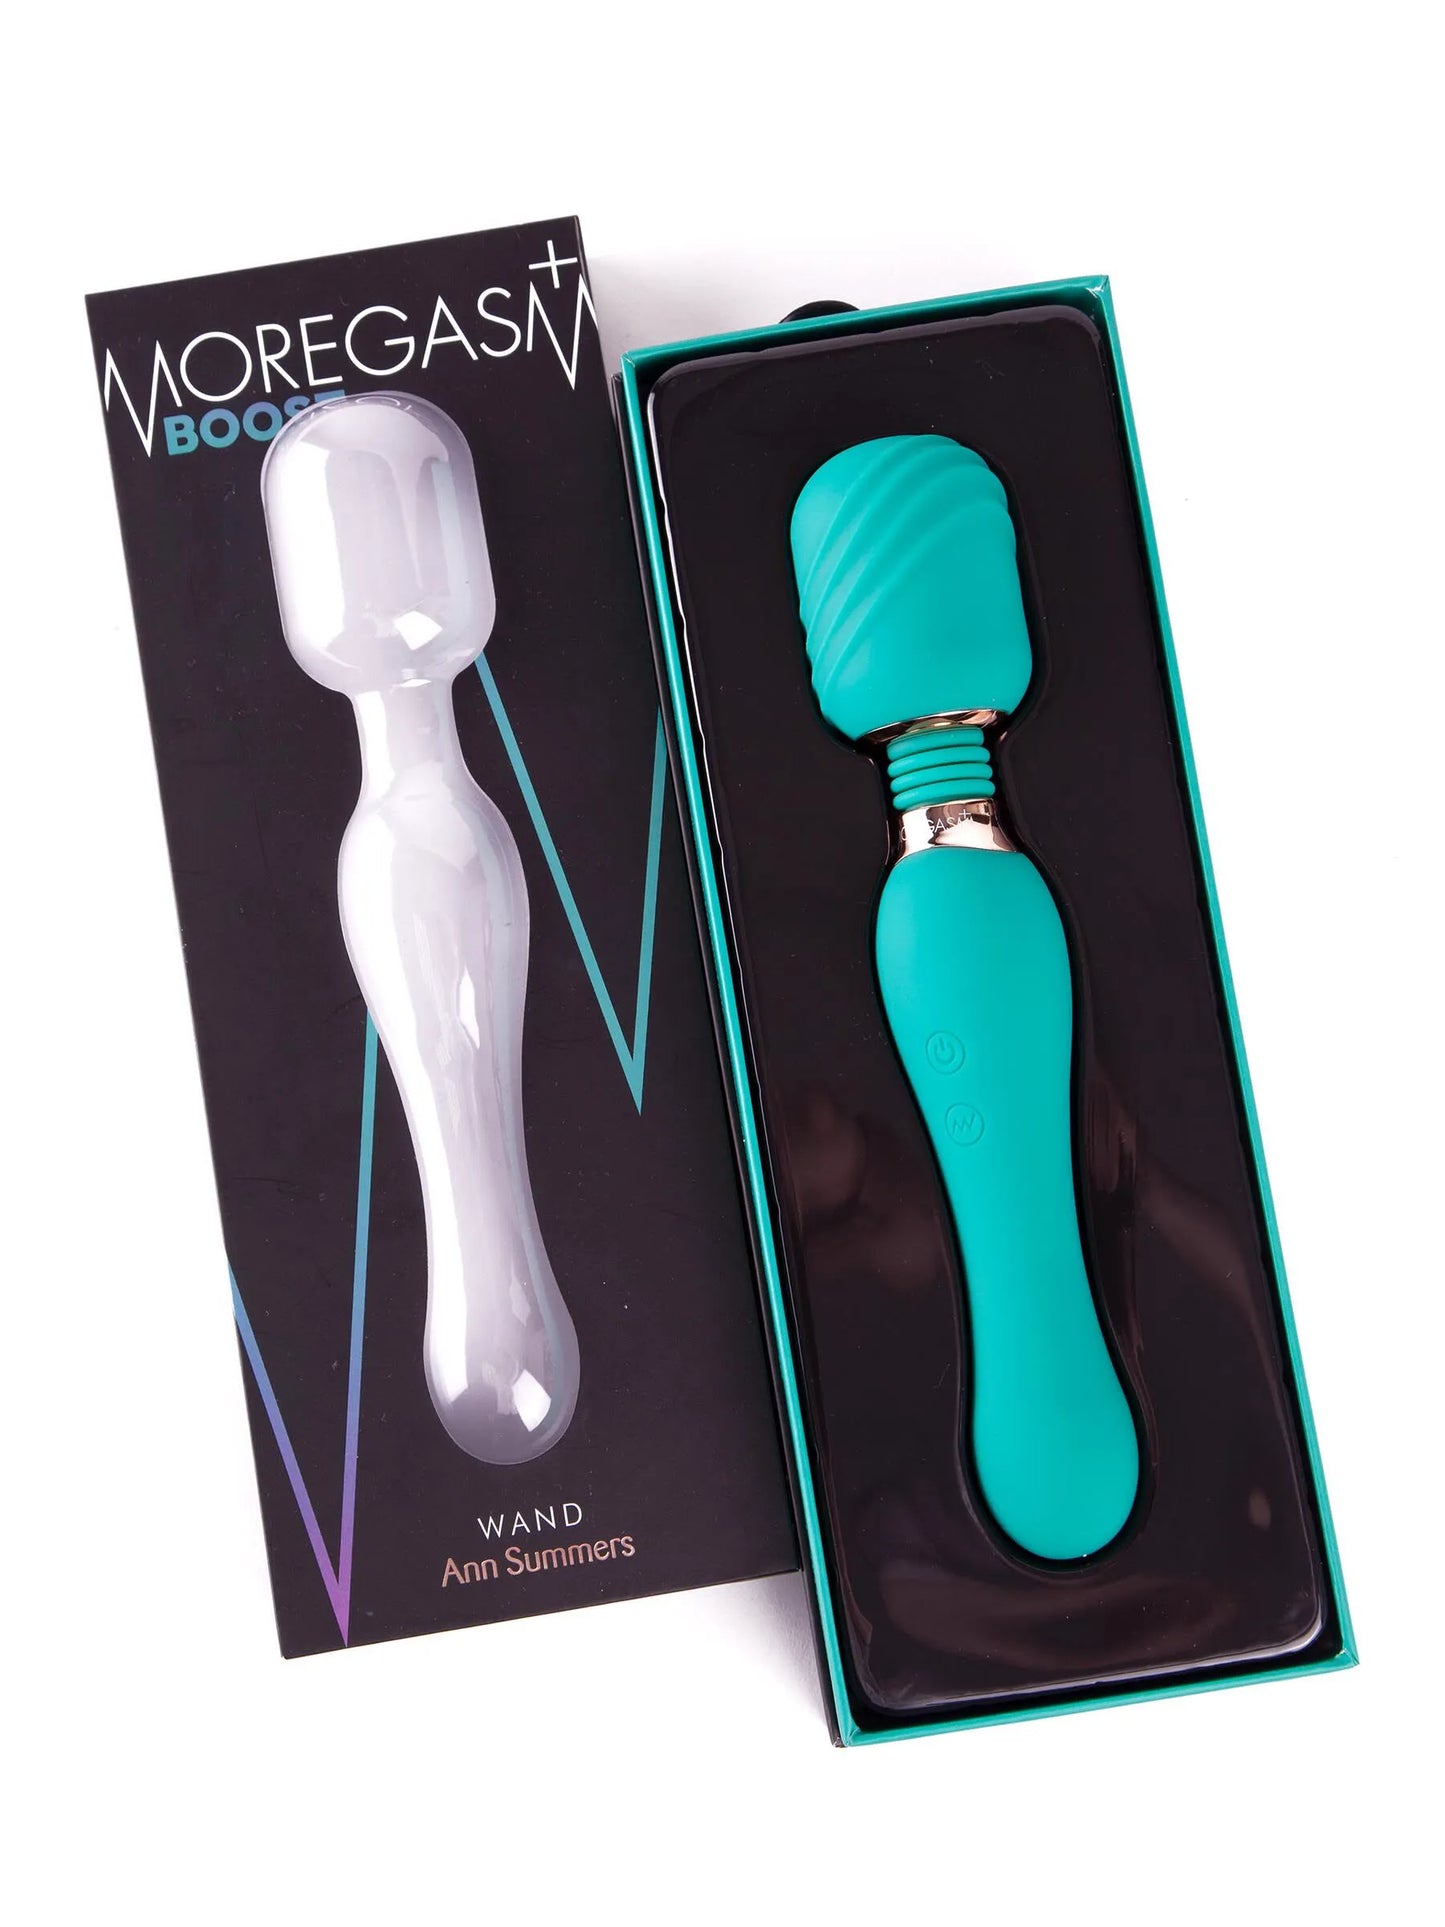 Moregasm Plus Boost Wand From Ann Summers, Image 05